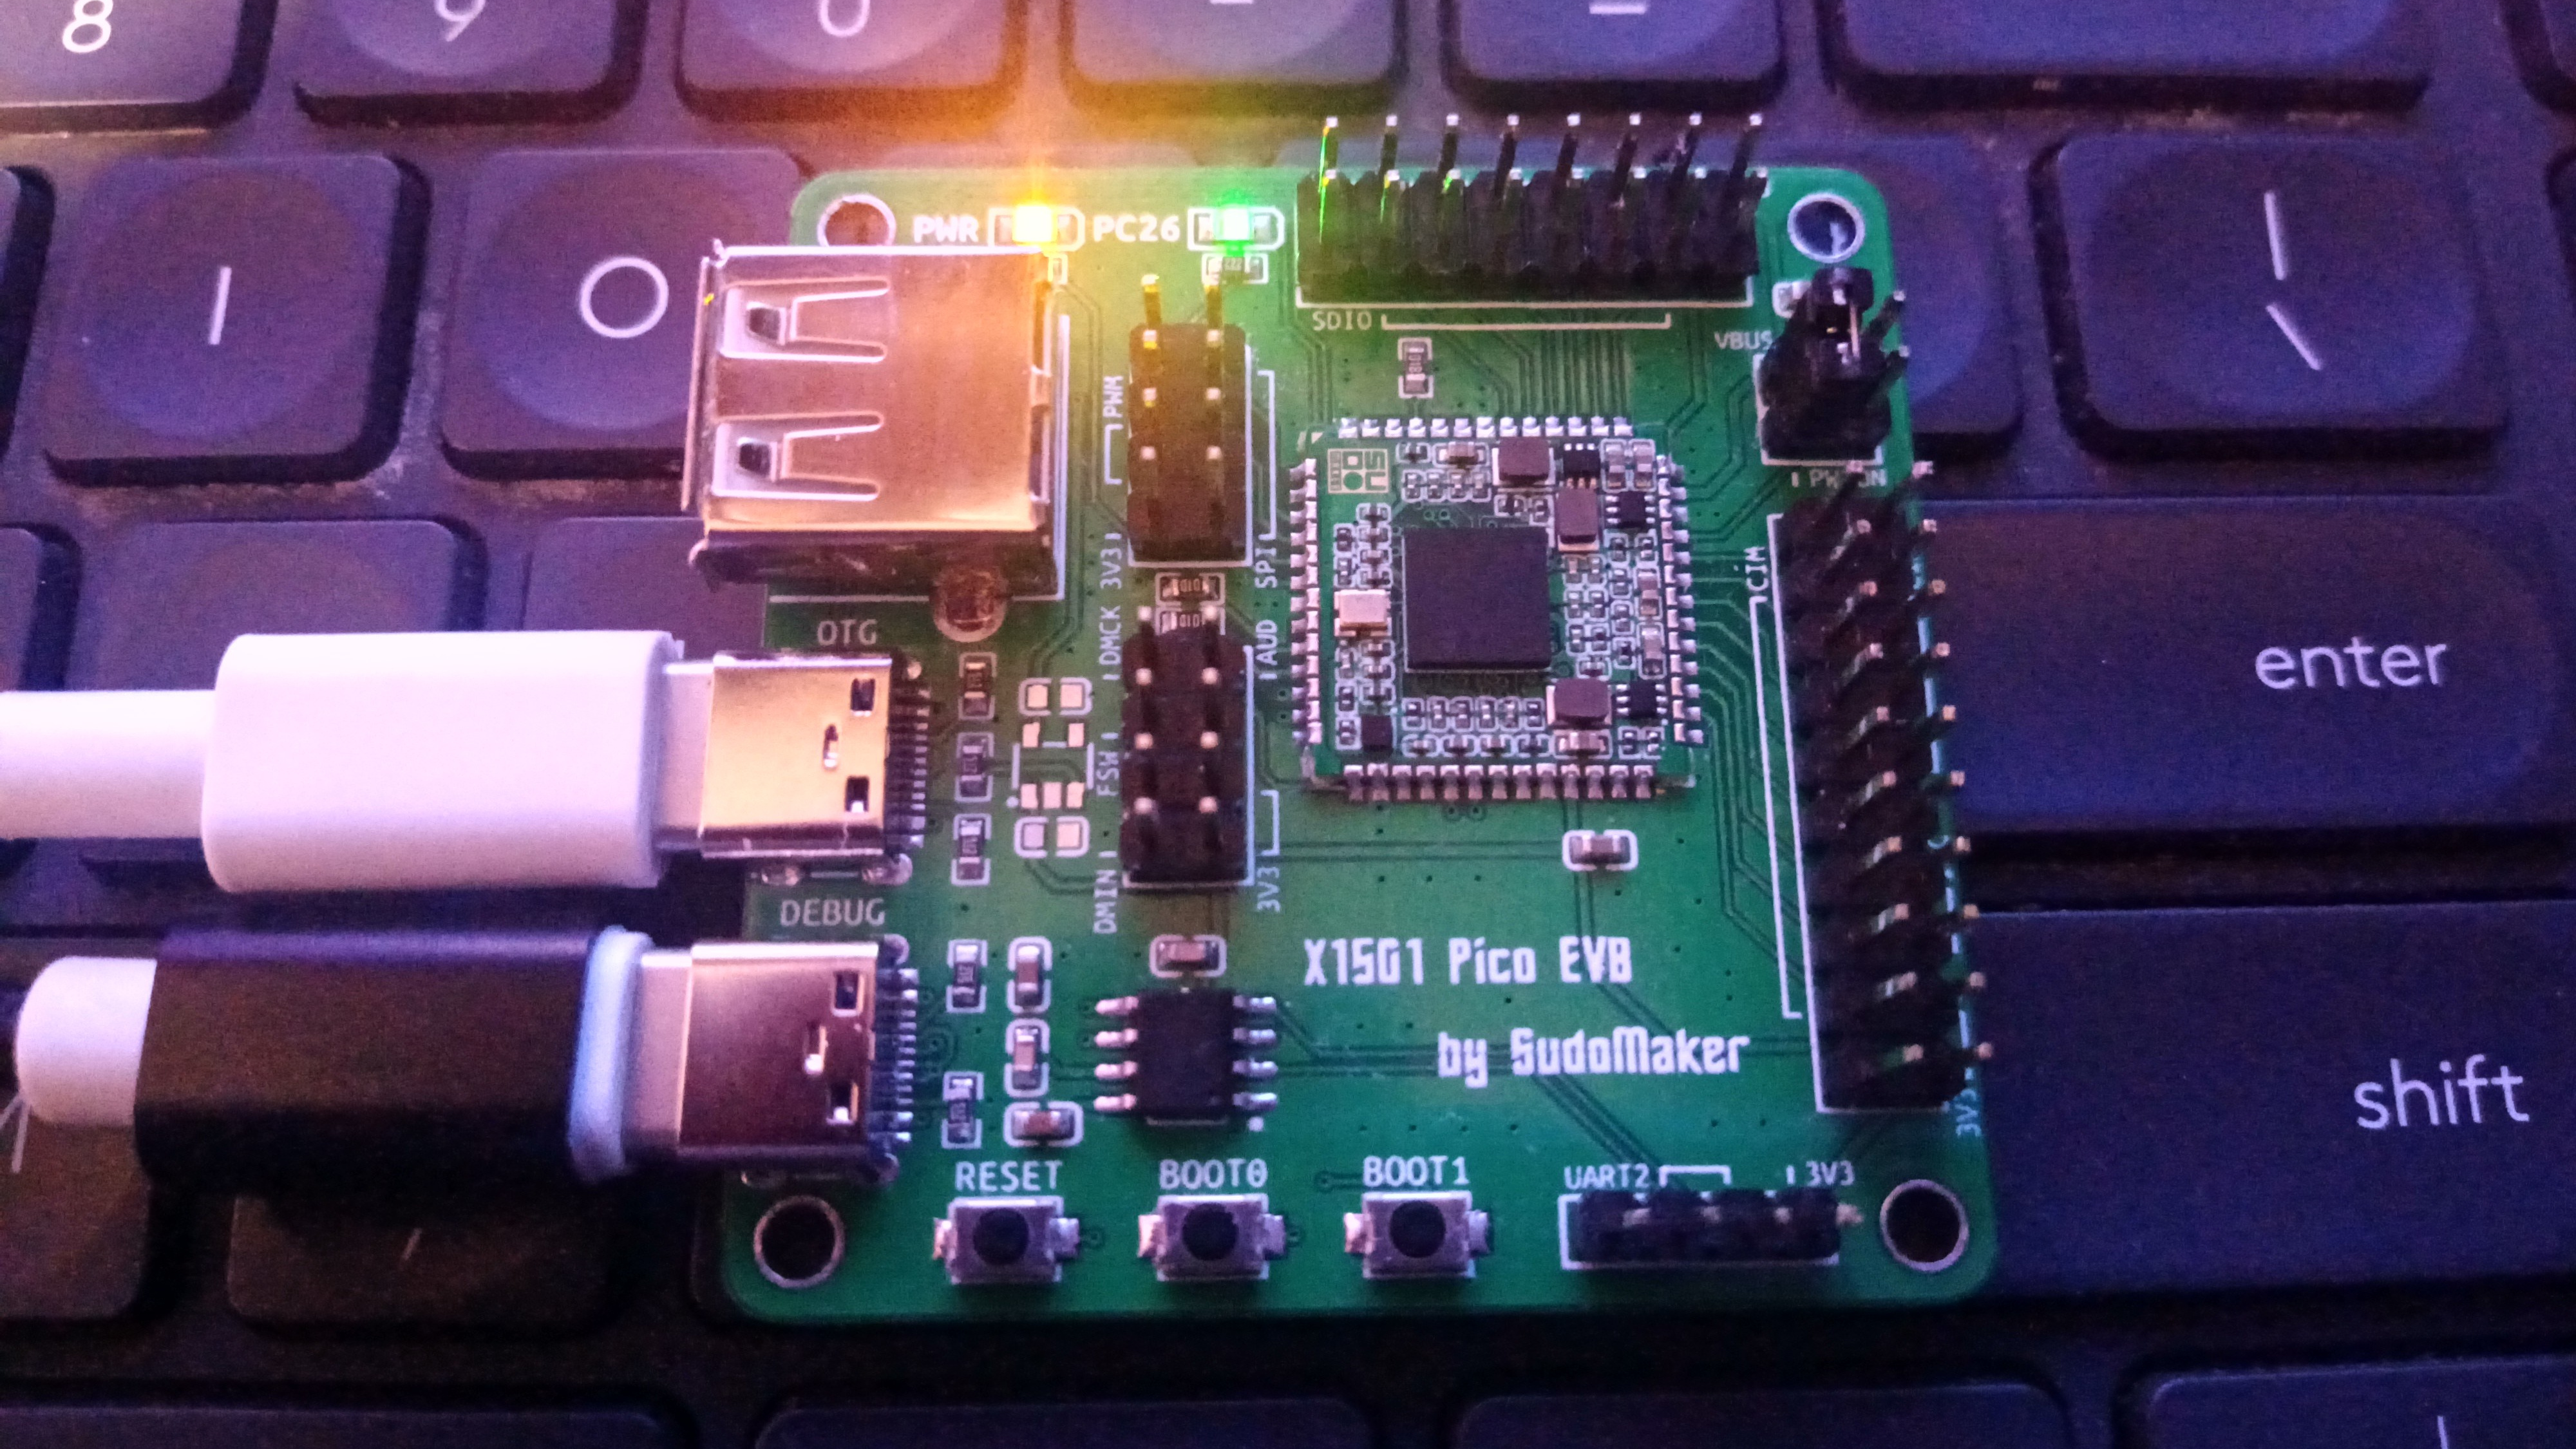 The SoM on an evaluation board, with two LEDs shining, one USB-C cable connected for power and another plugged into the OTG port